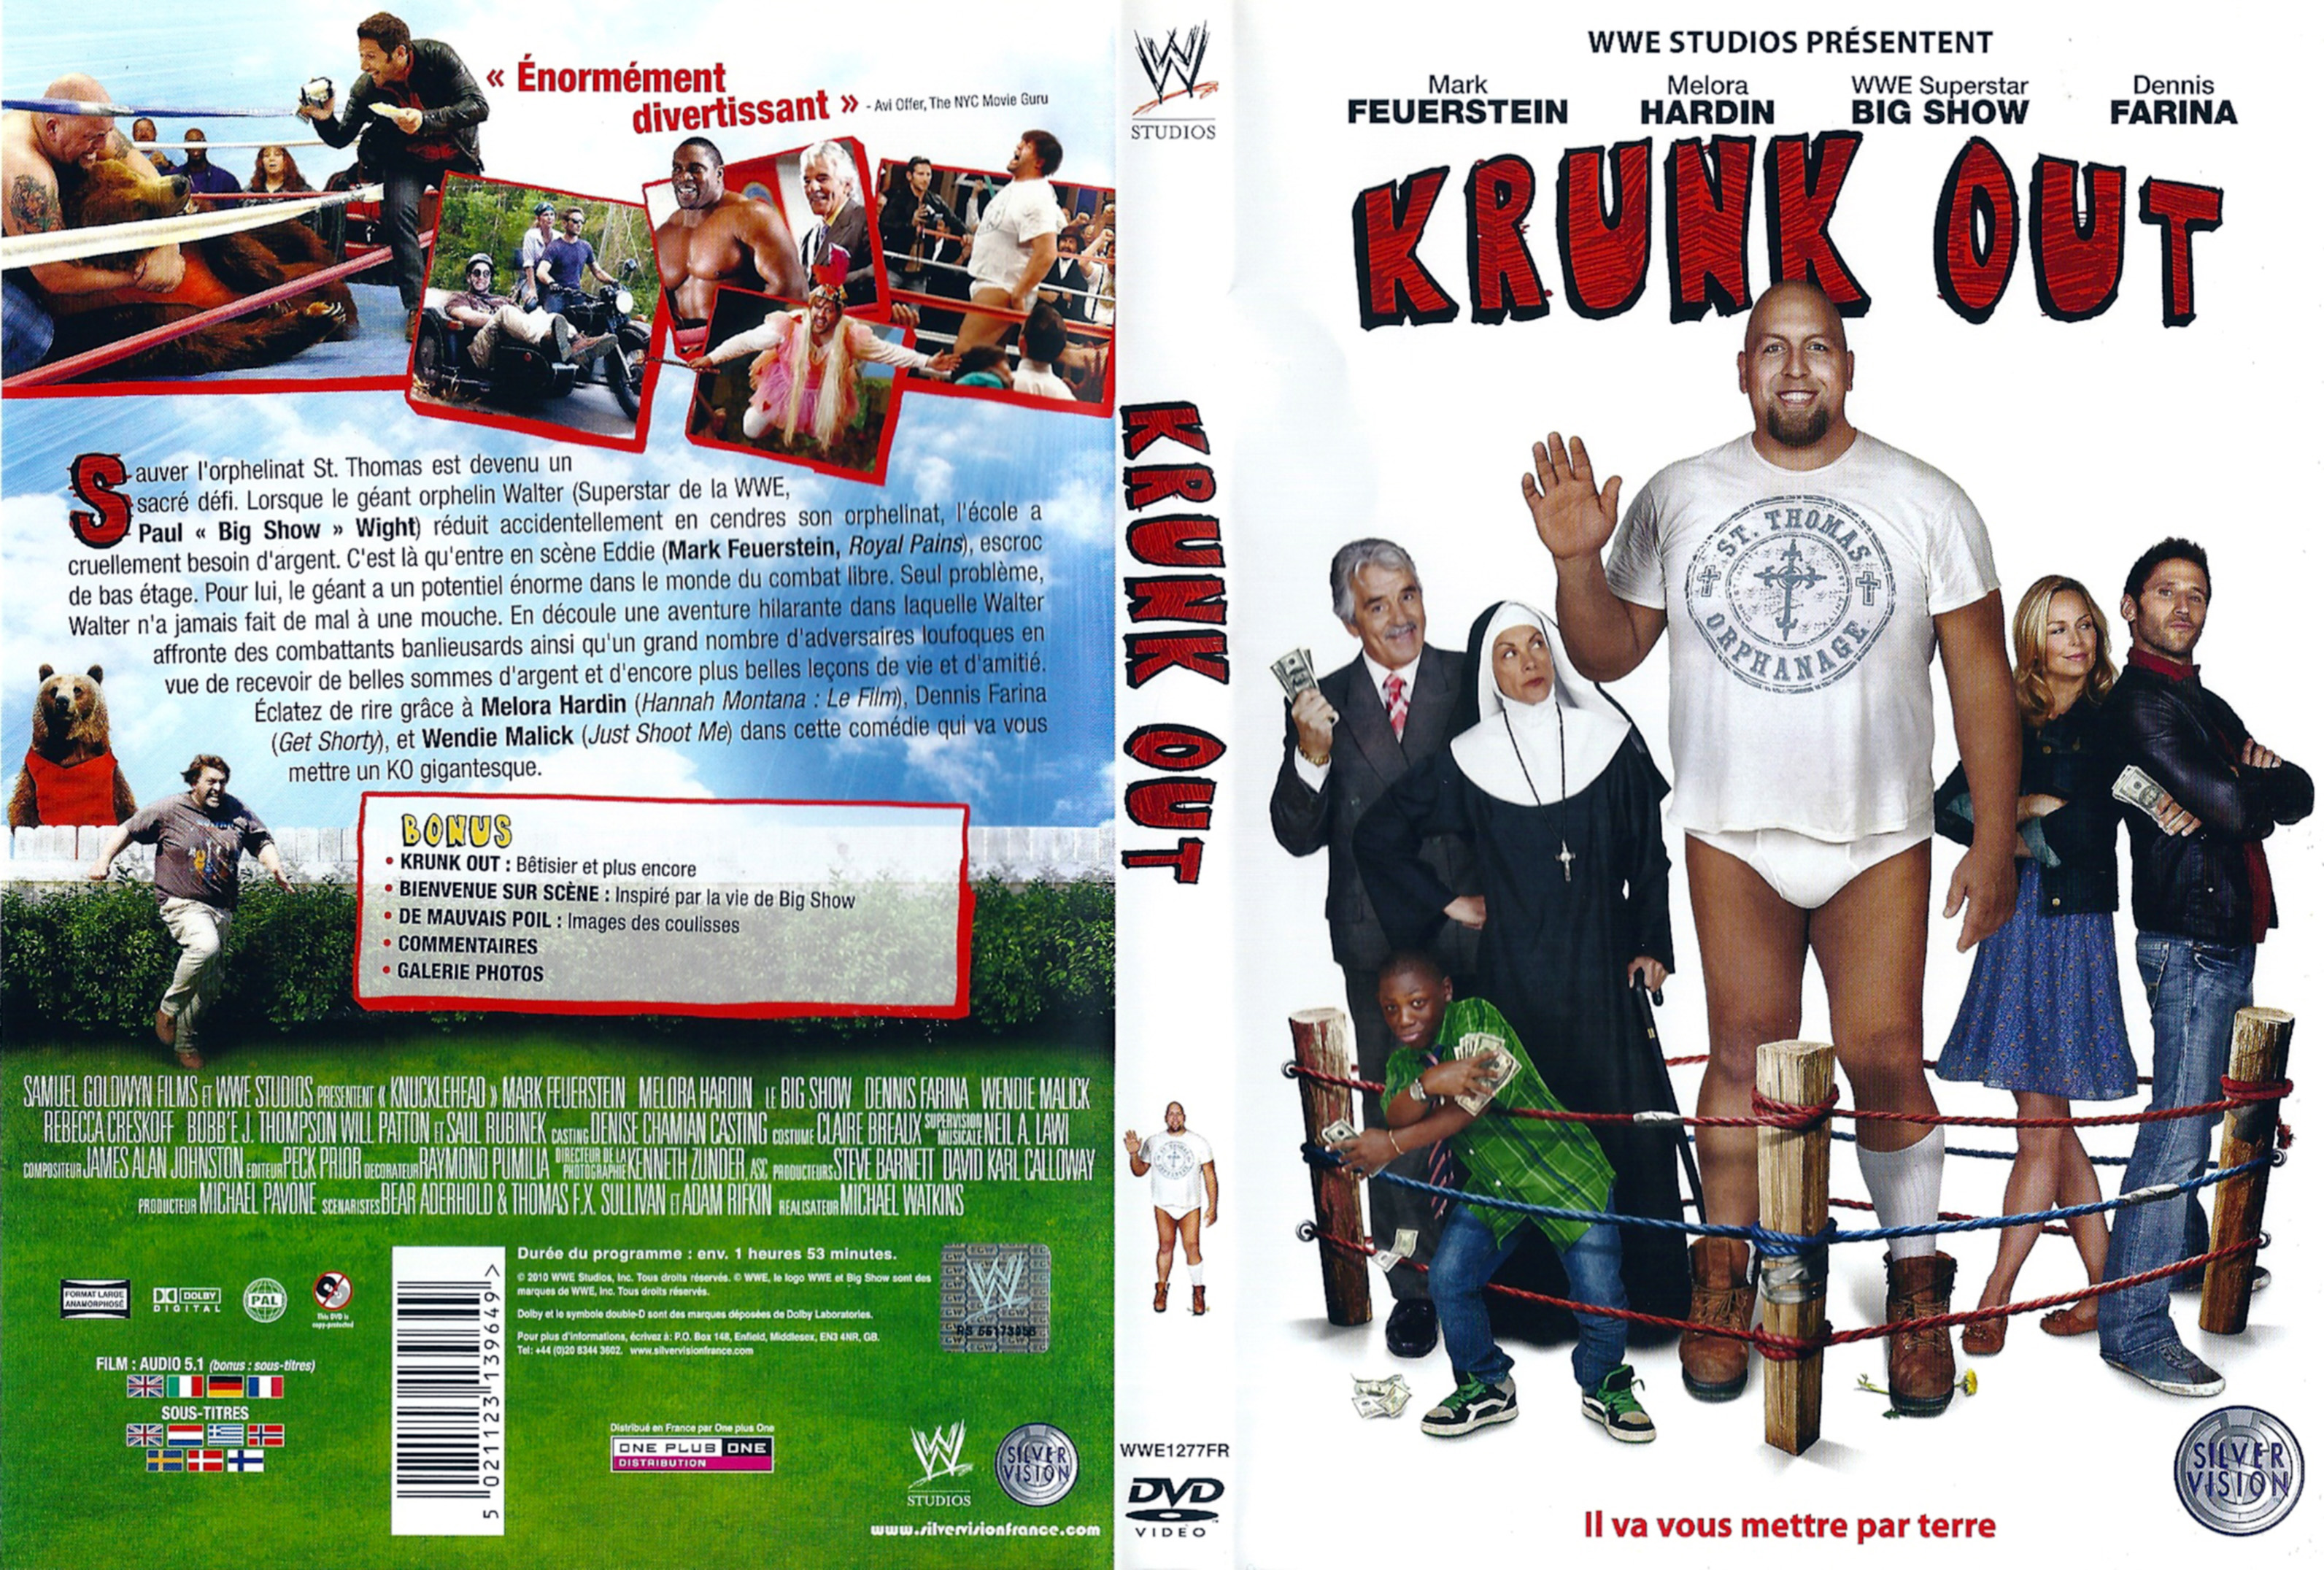 Jaquette DVD Krunk out